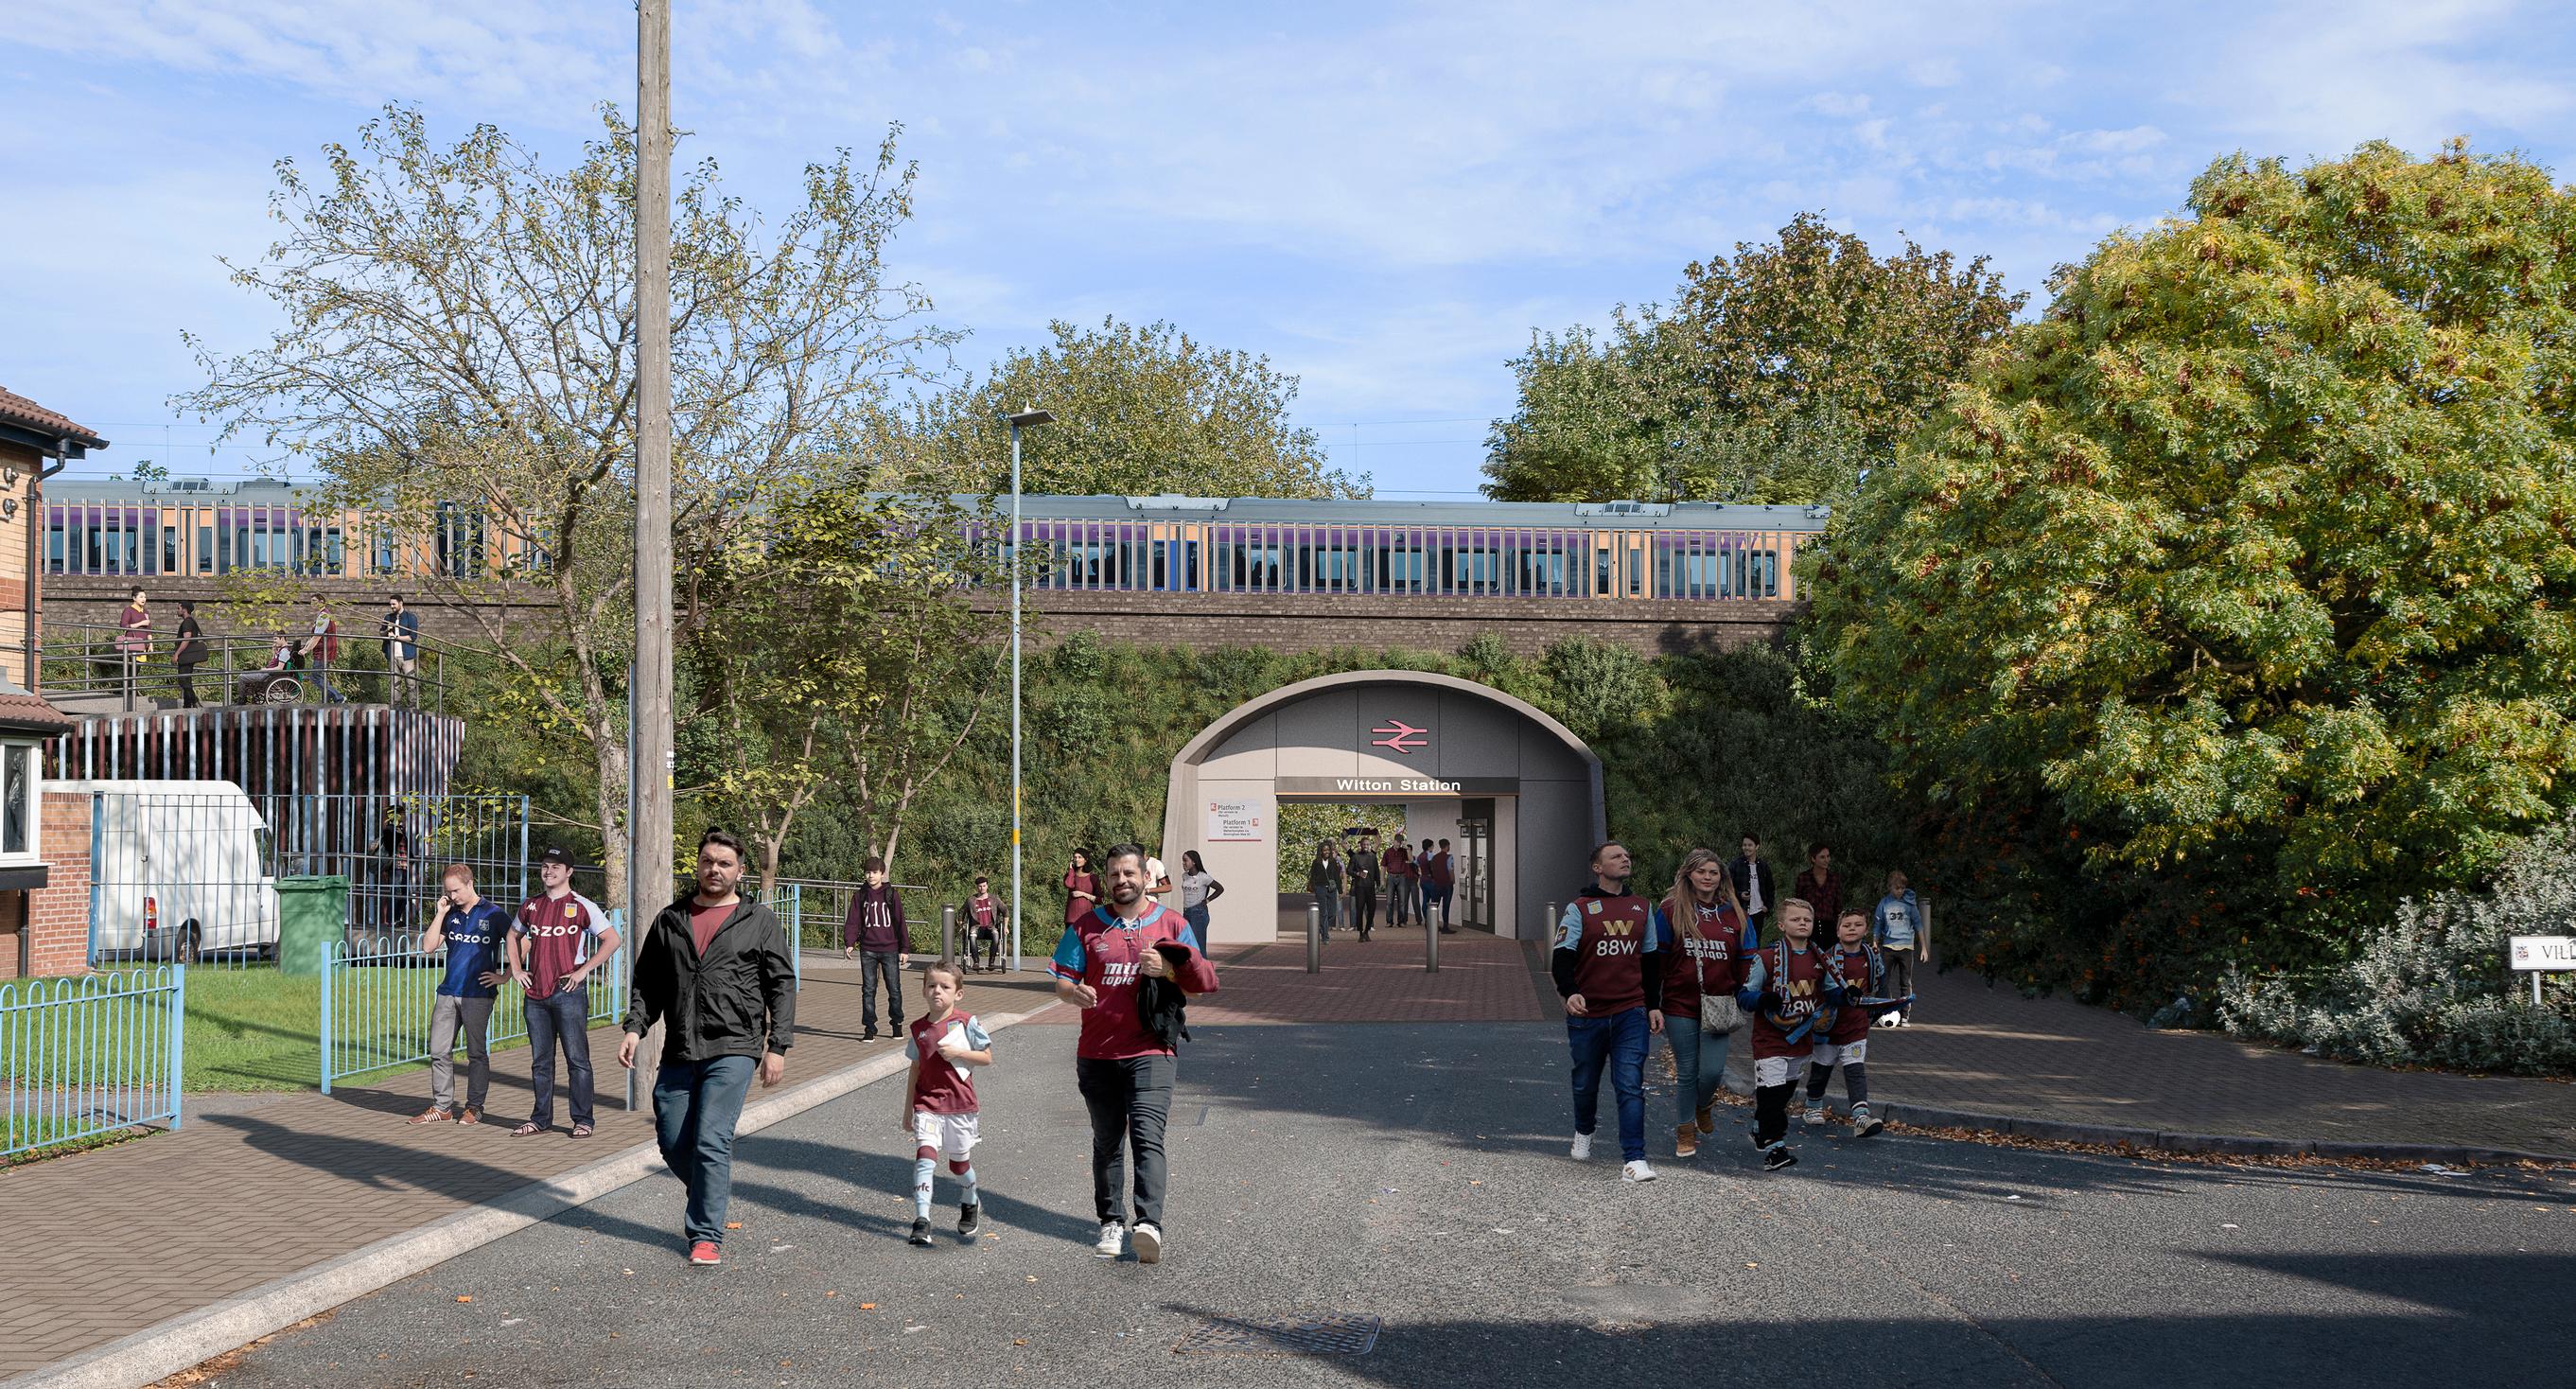 Designs for a new pedestrian tunnel under the rail line at Station Road